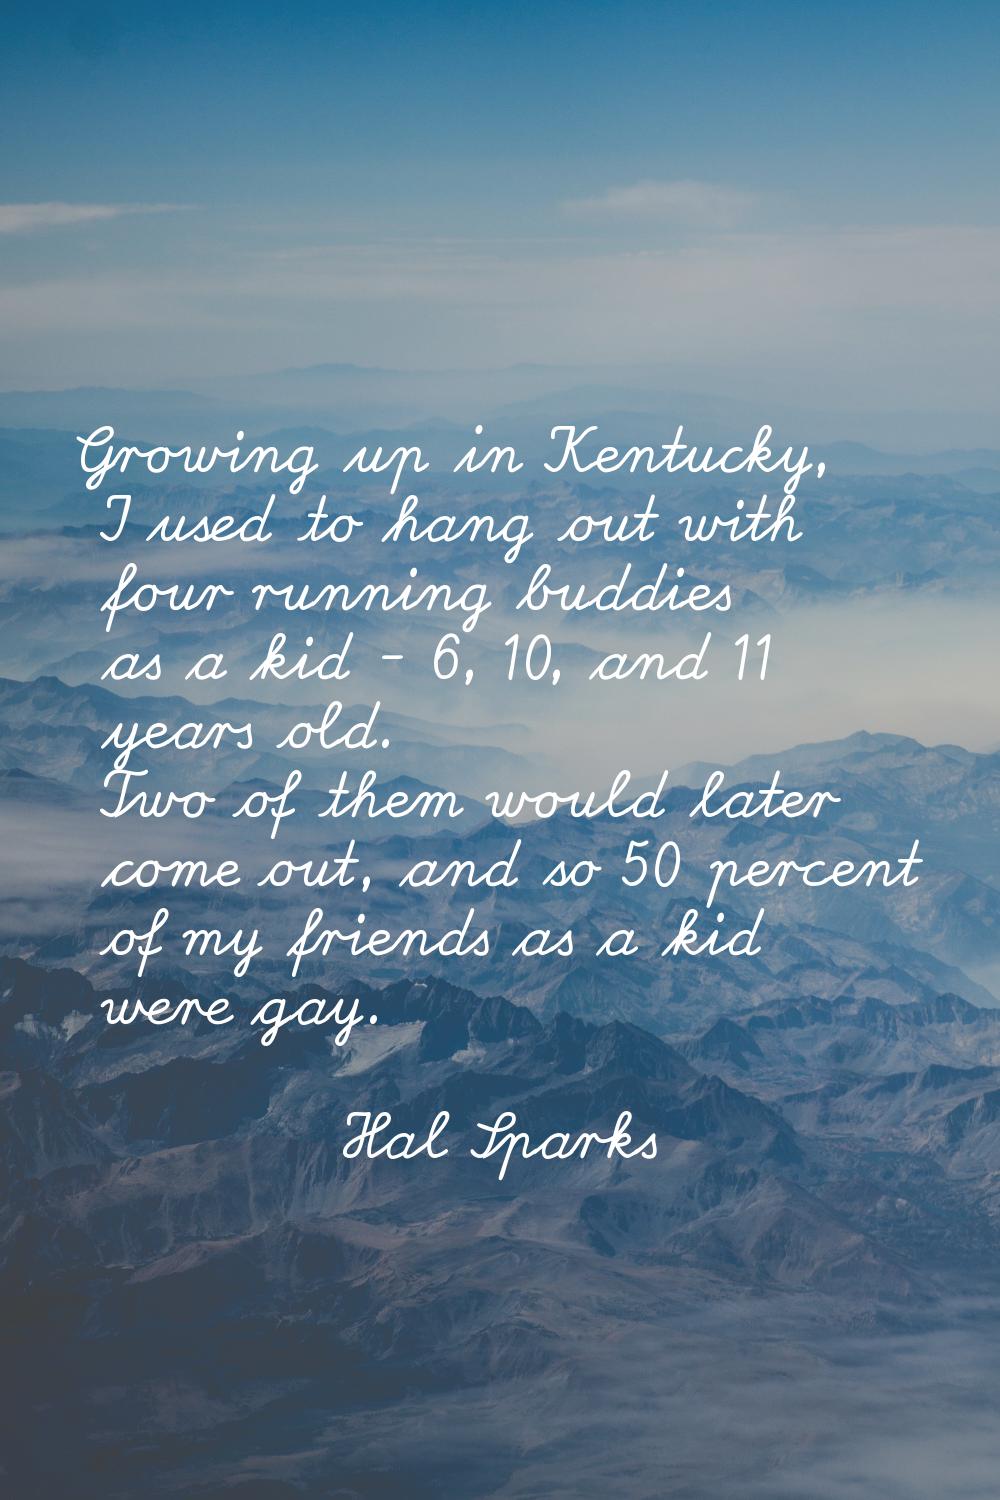 Growing up in Kentucky, I used to hang out with four running buddies as a kid - 6, 10, and 11 years